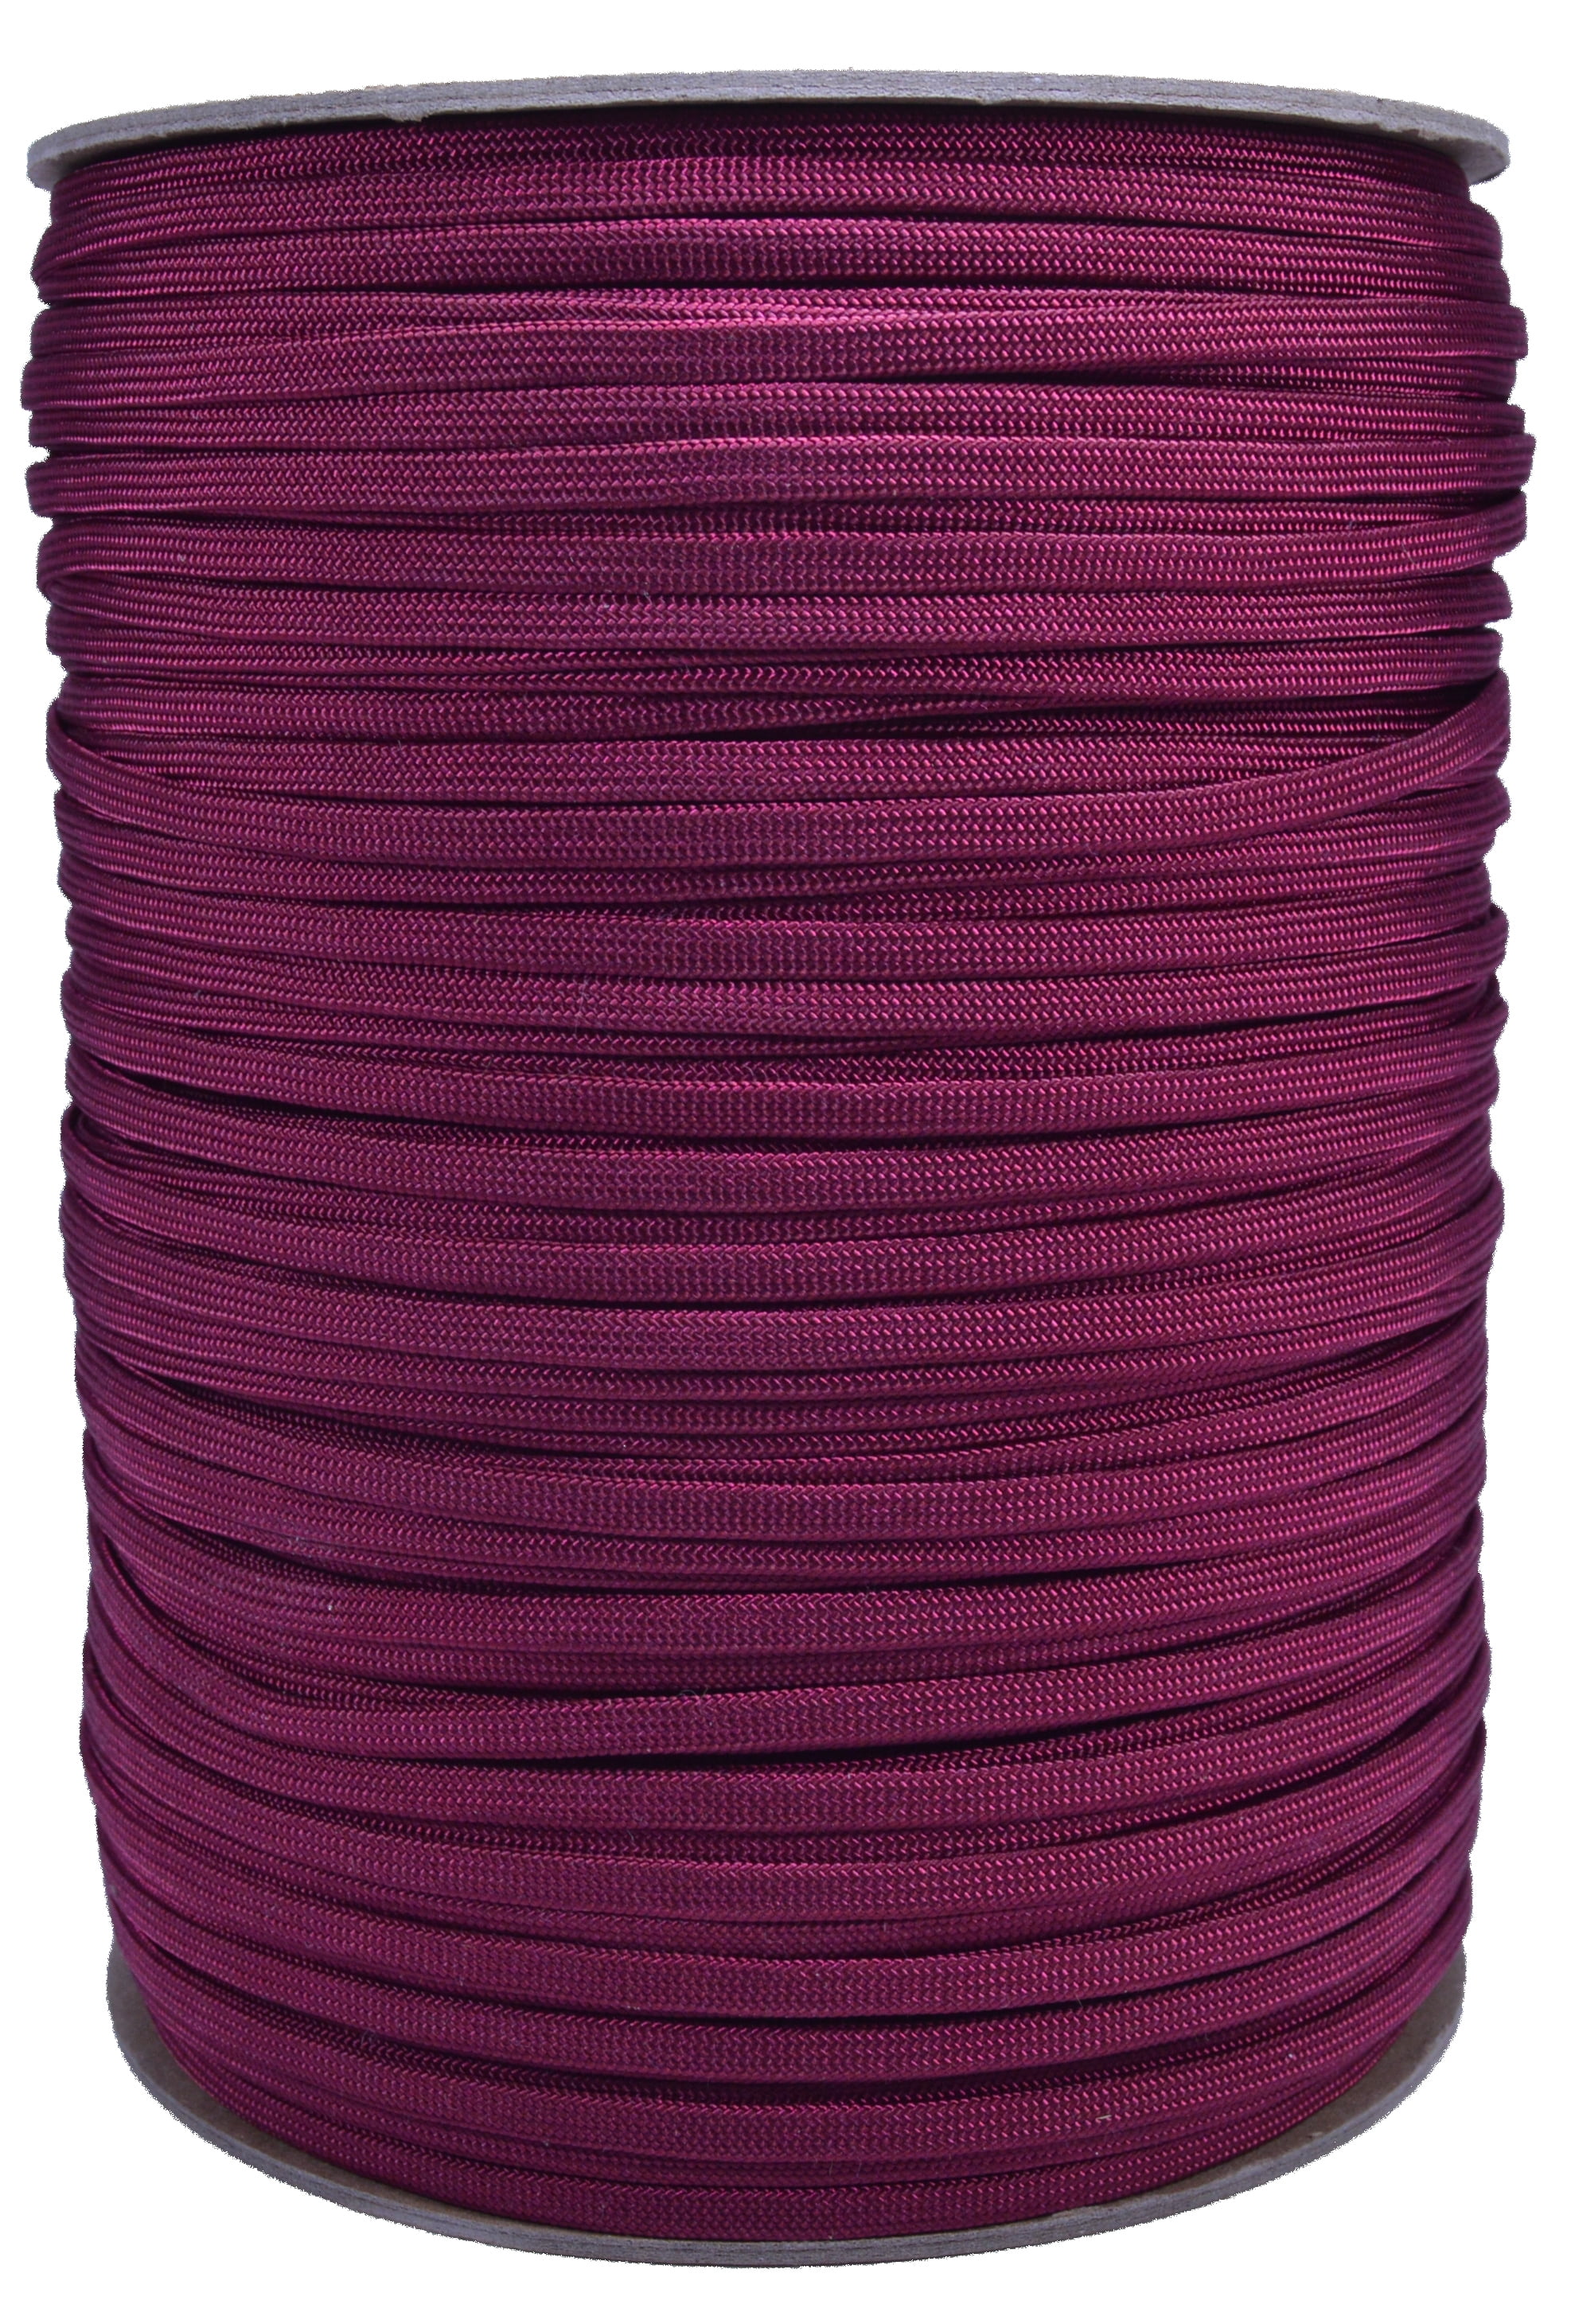 Neon Pink Coreless/Gutted 550 Paracord - 1000 Foot Spool 